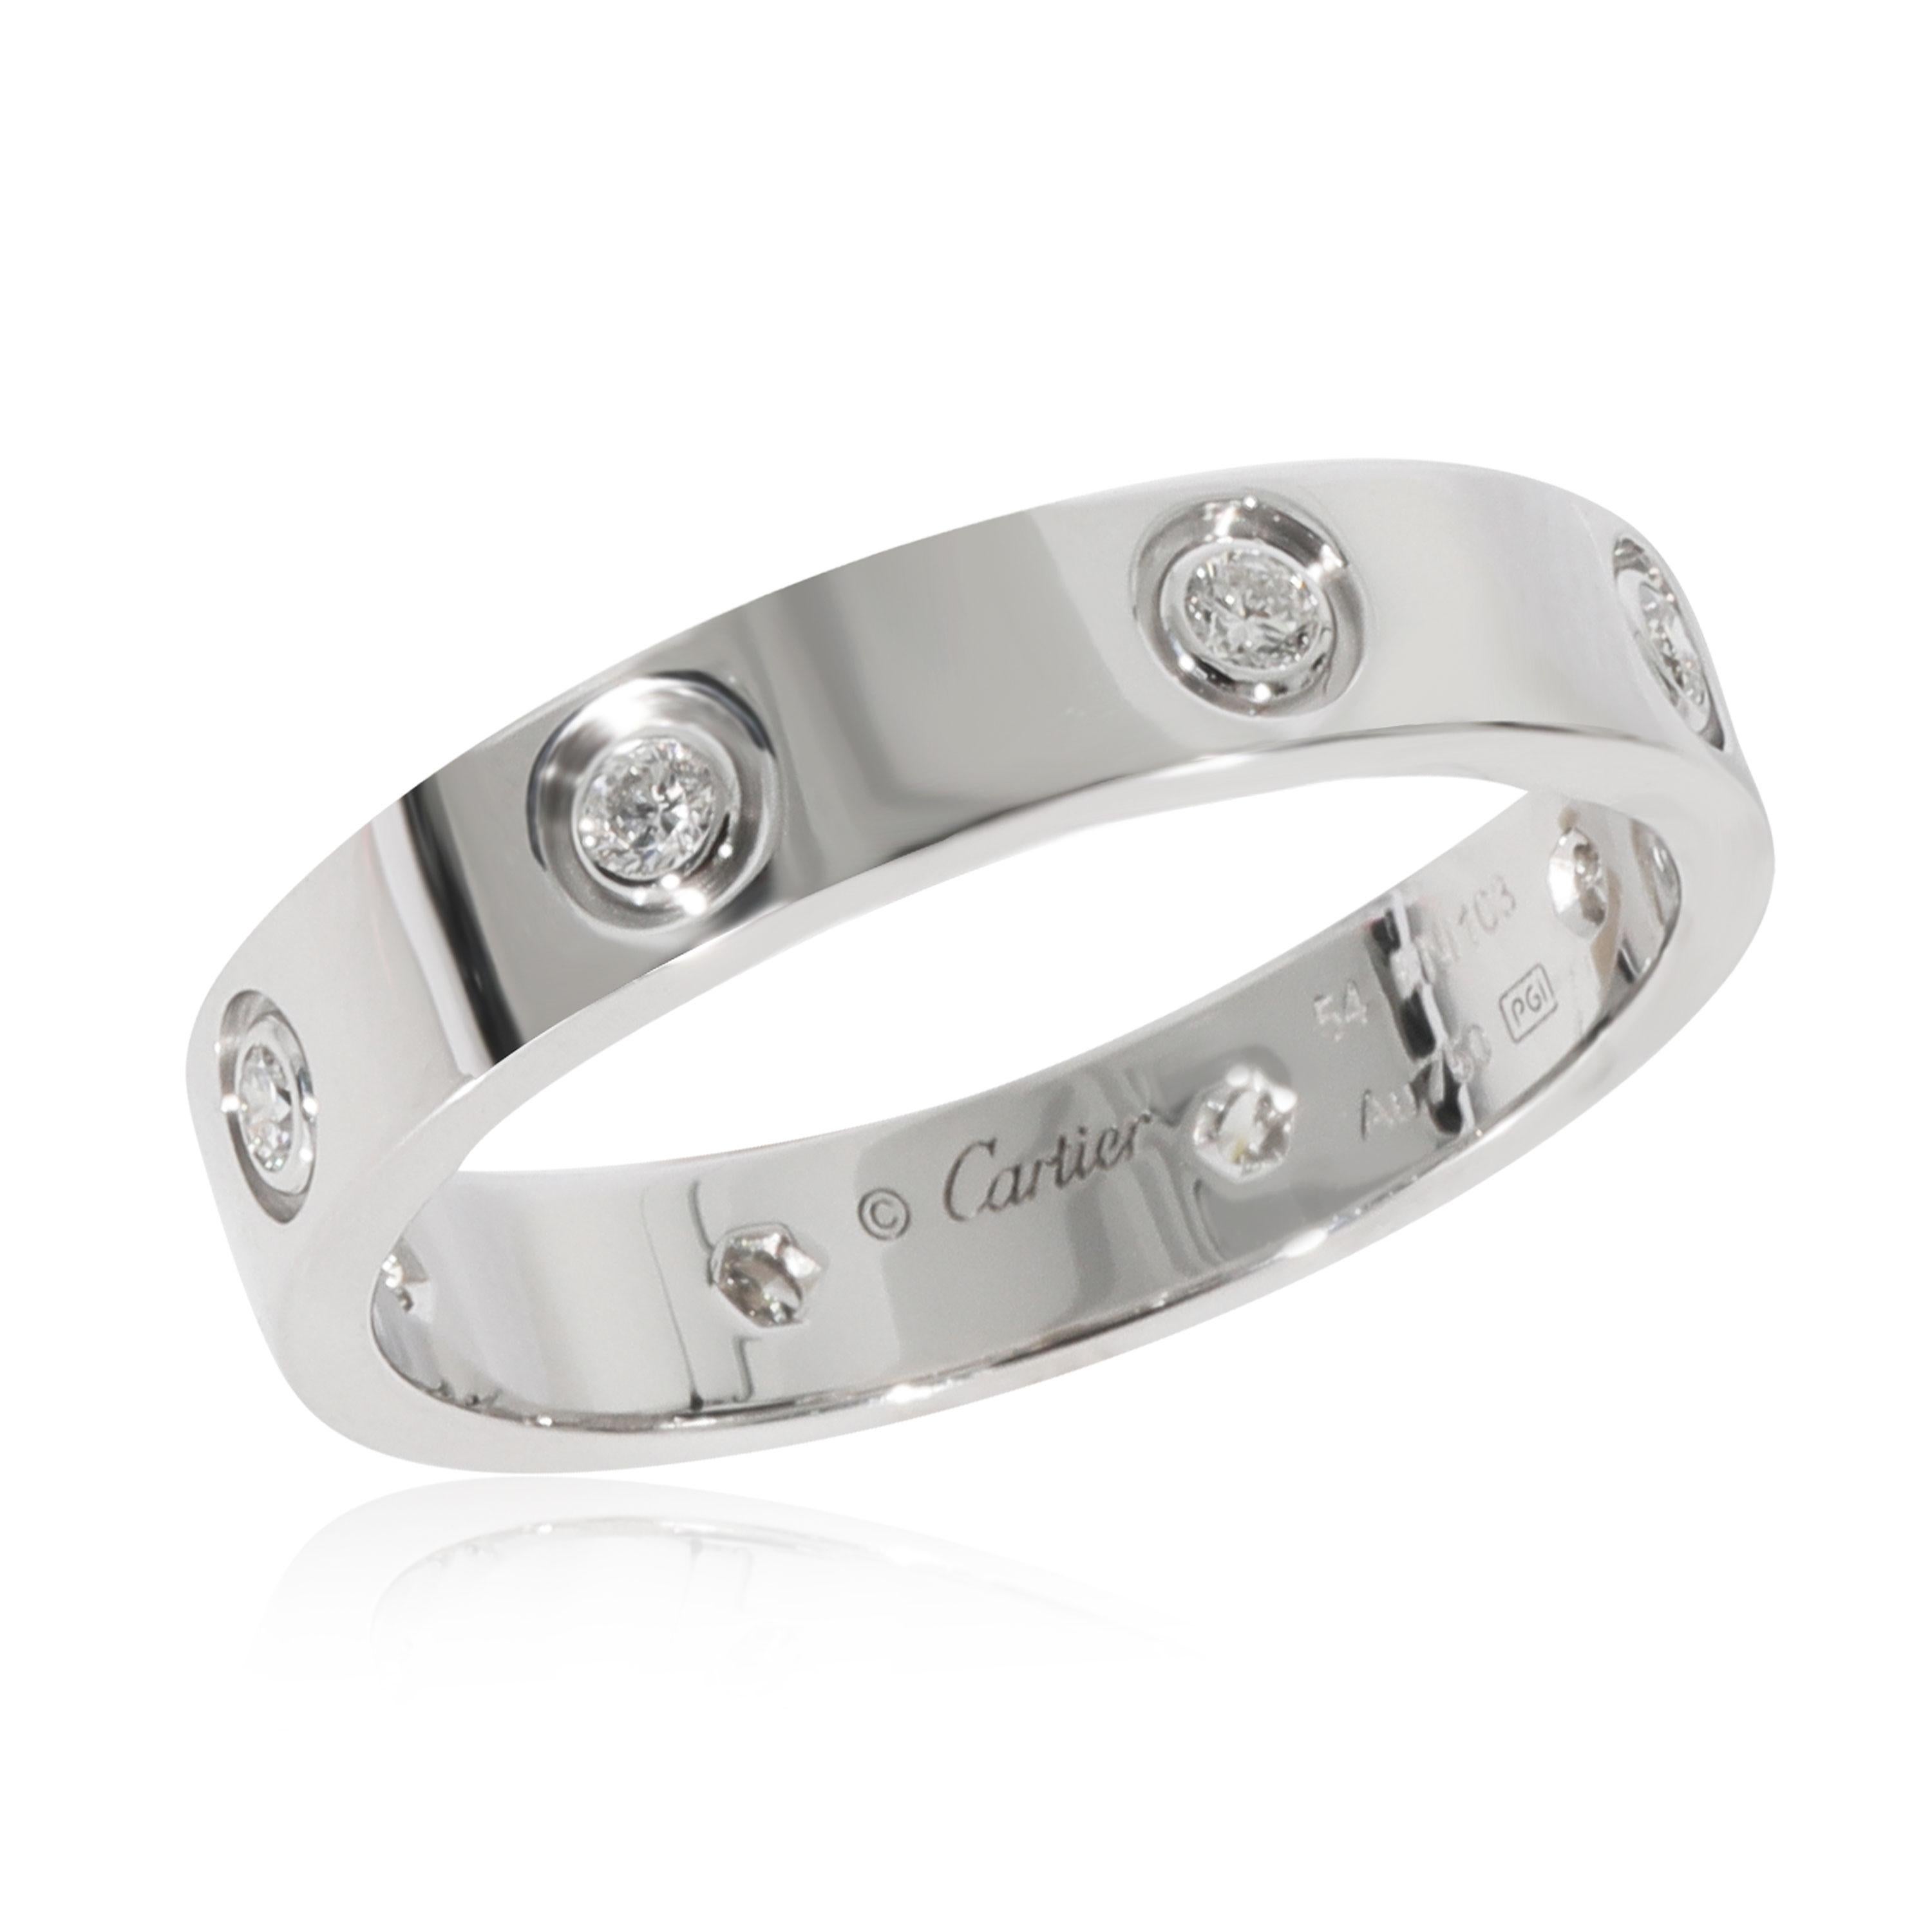 Women's Cartier Love Diamond Band in 18k White Gold 0.19 Ctw For Sale